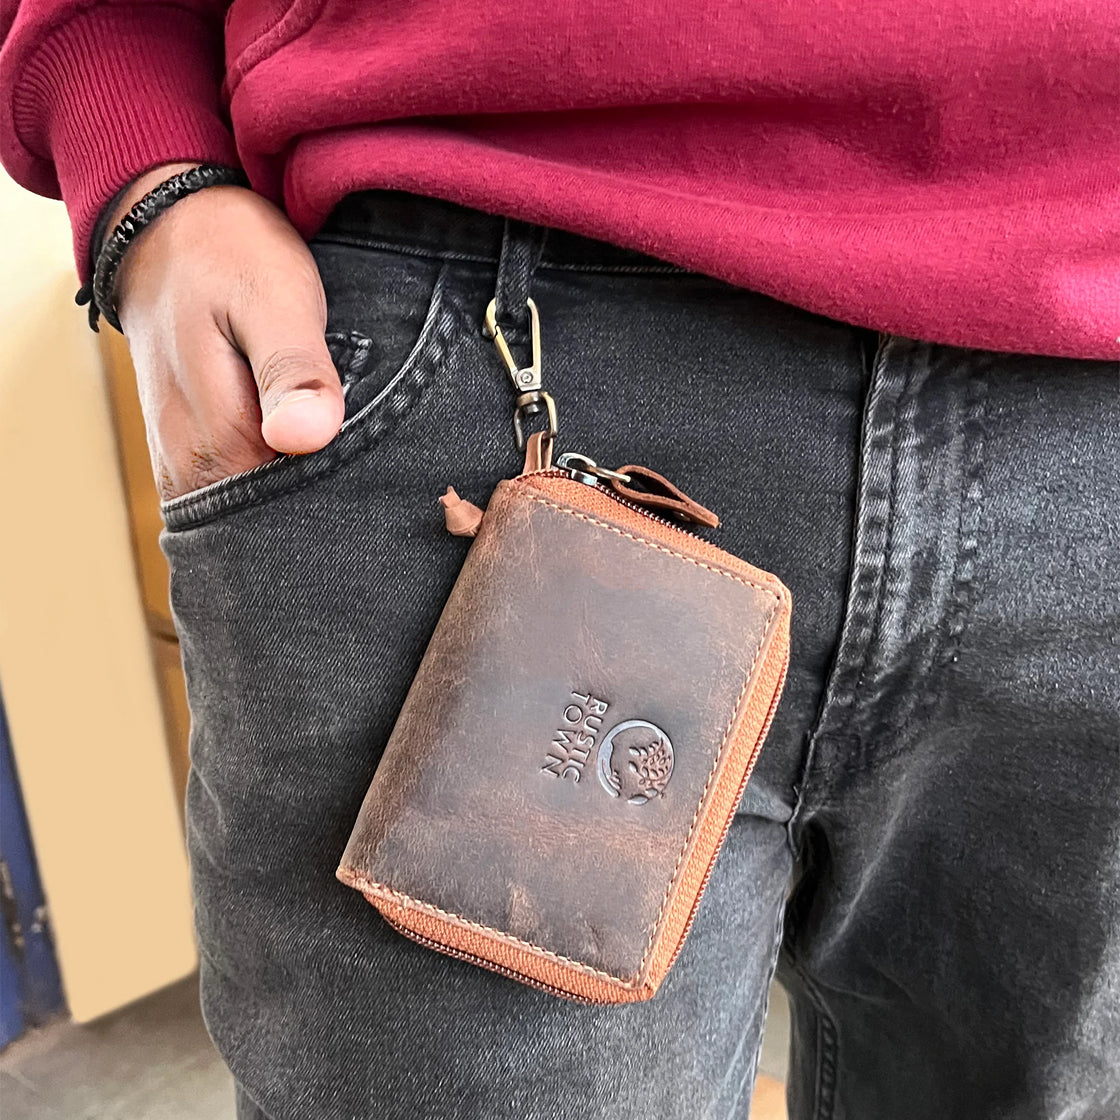 A review of the Rustic Town Key Holder Wallet